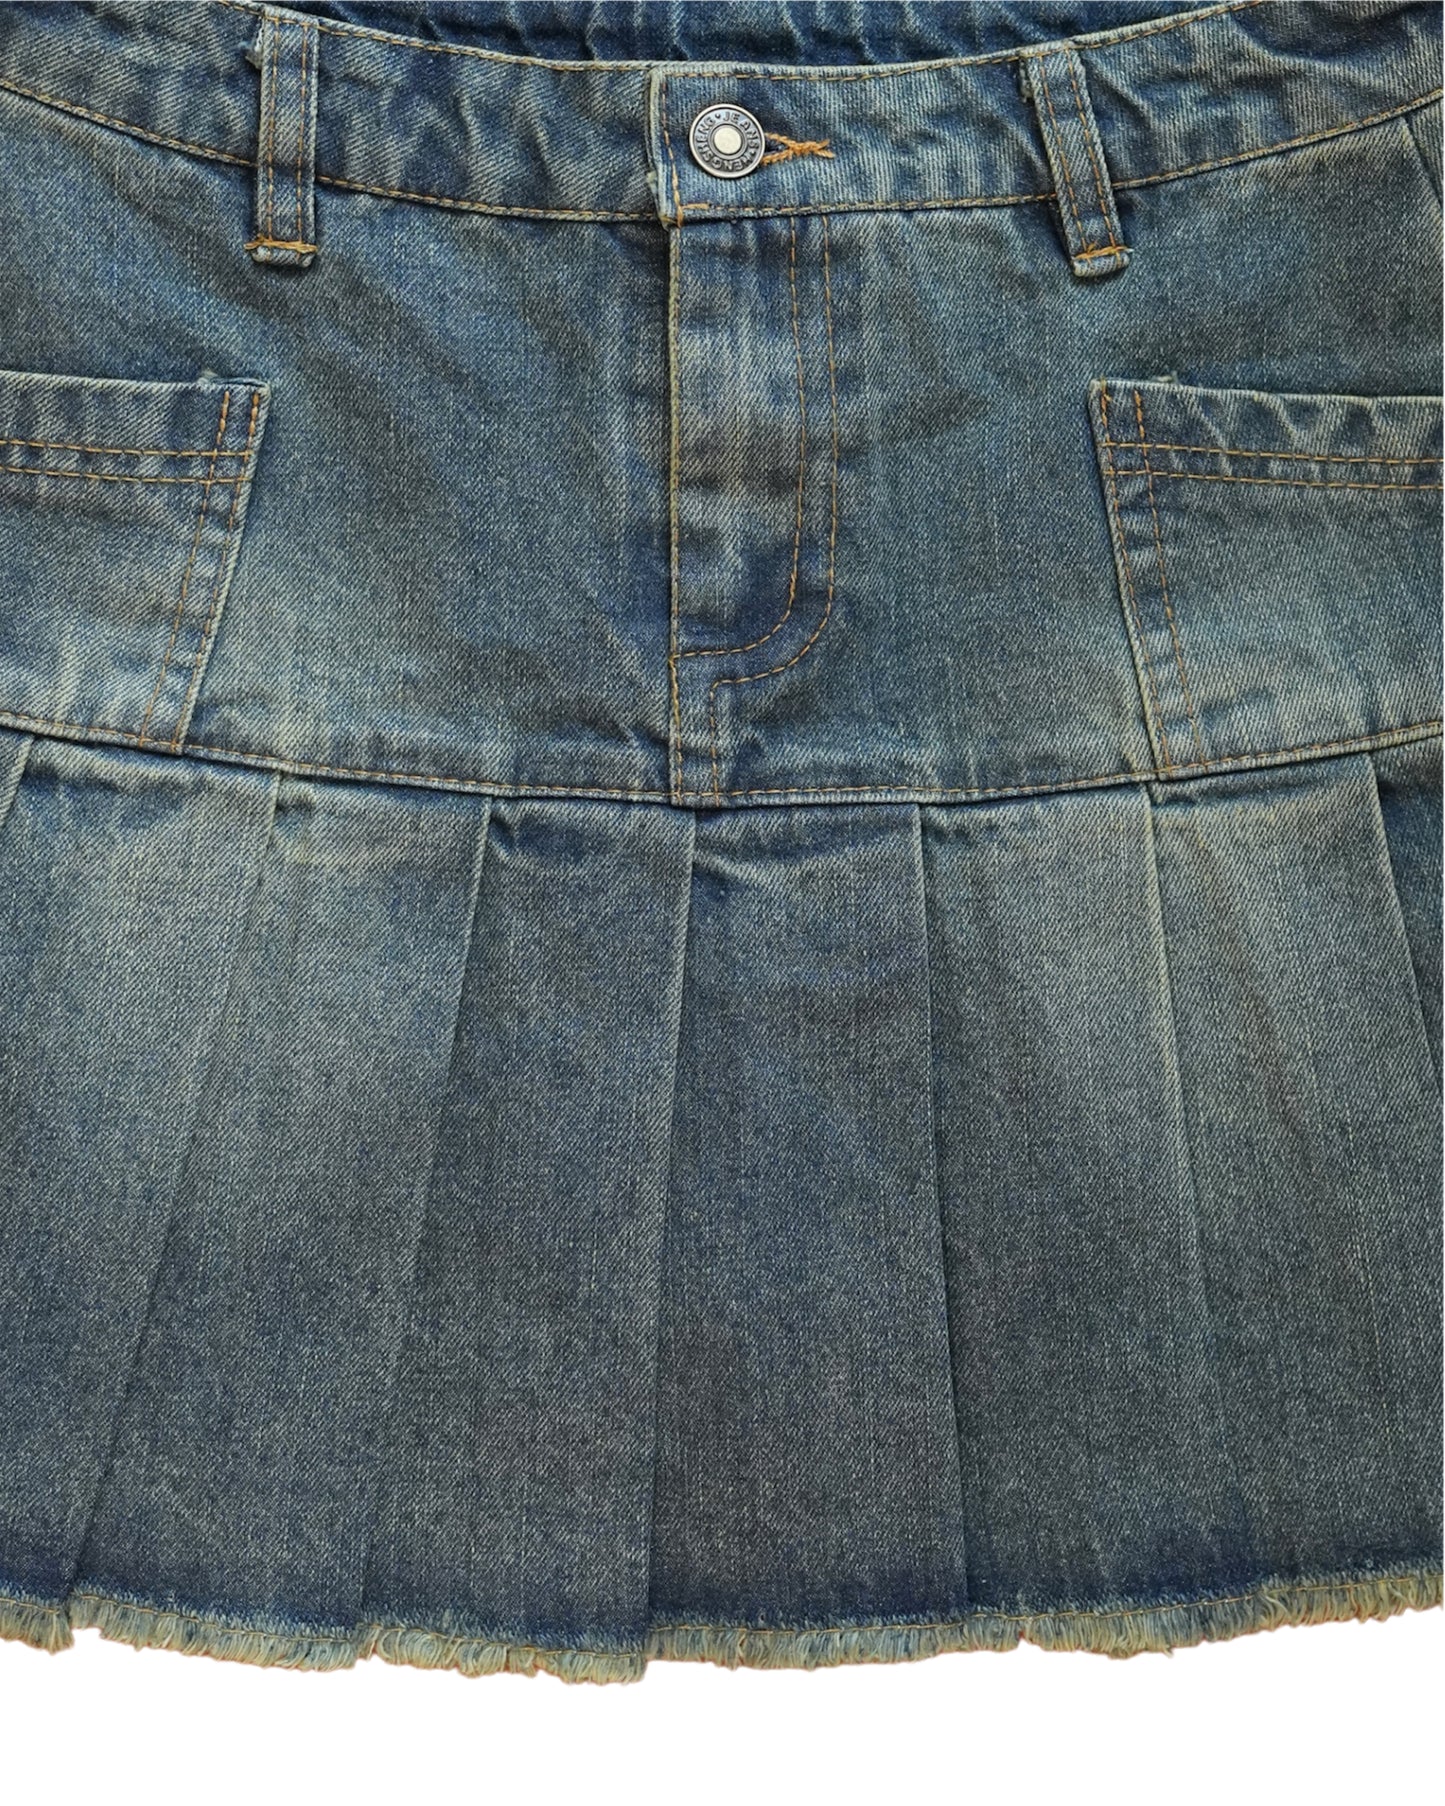 Old washed denim pleated skirt